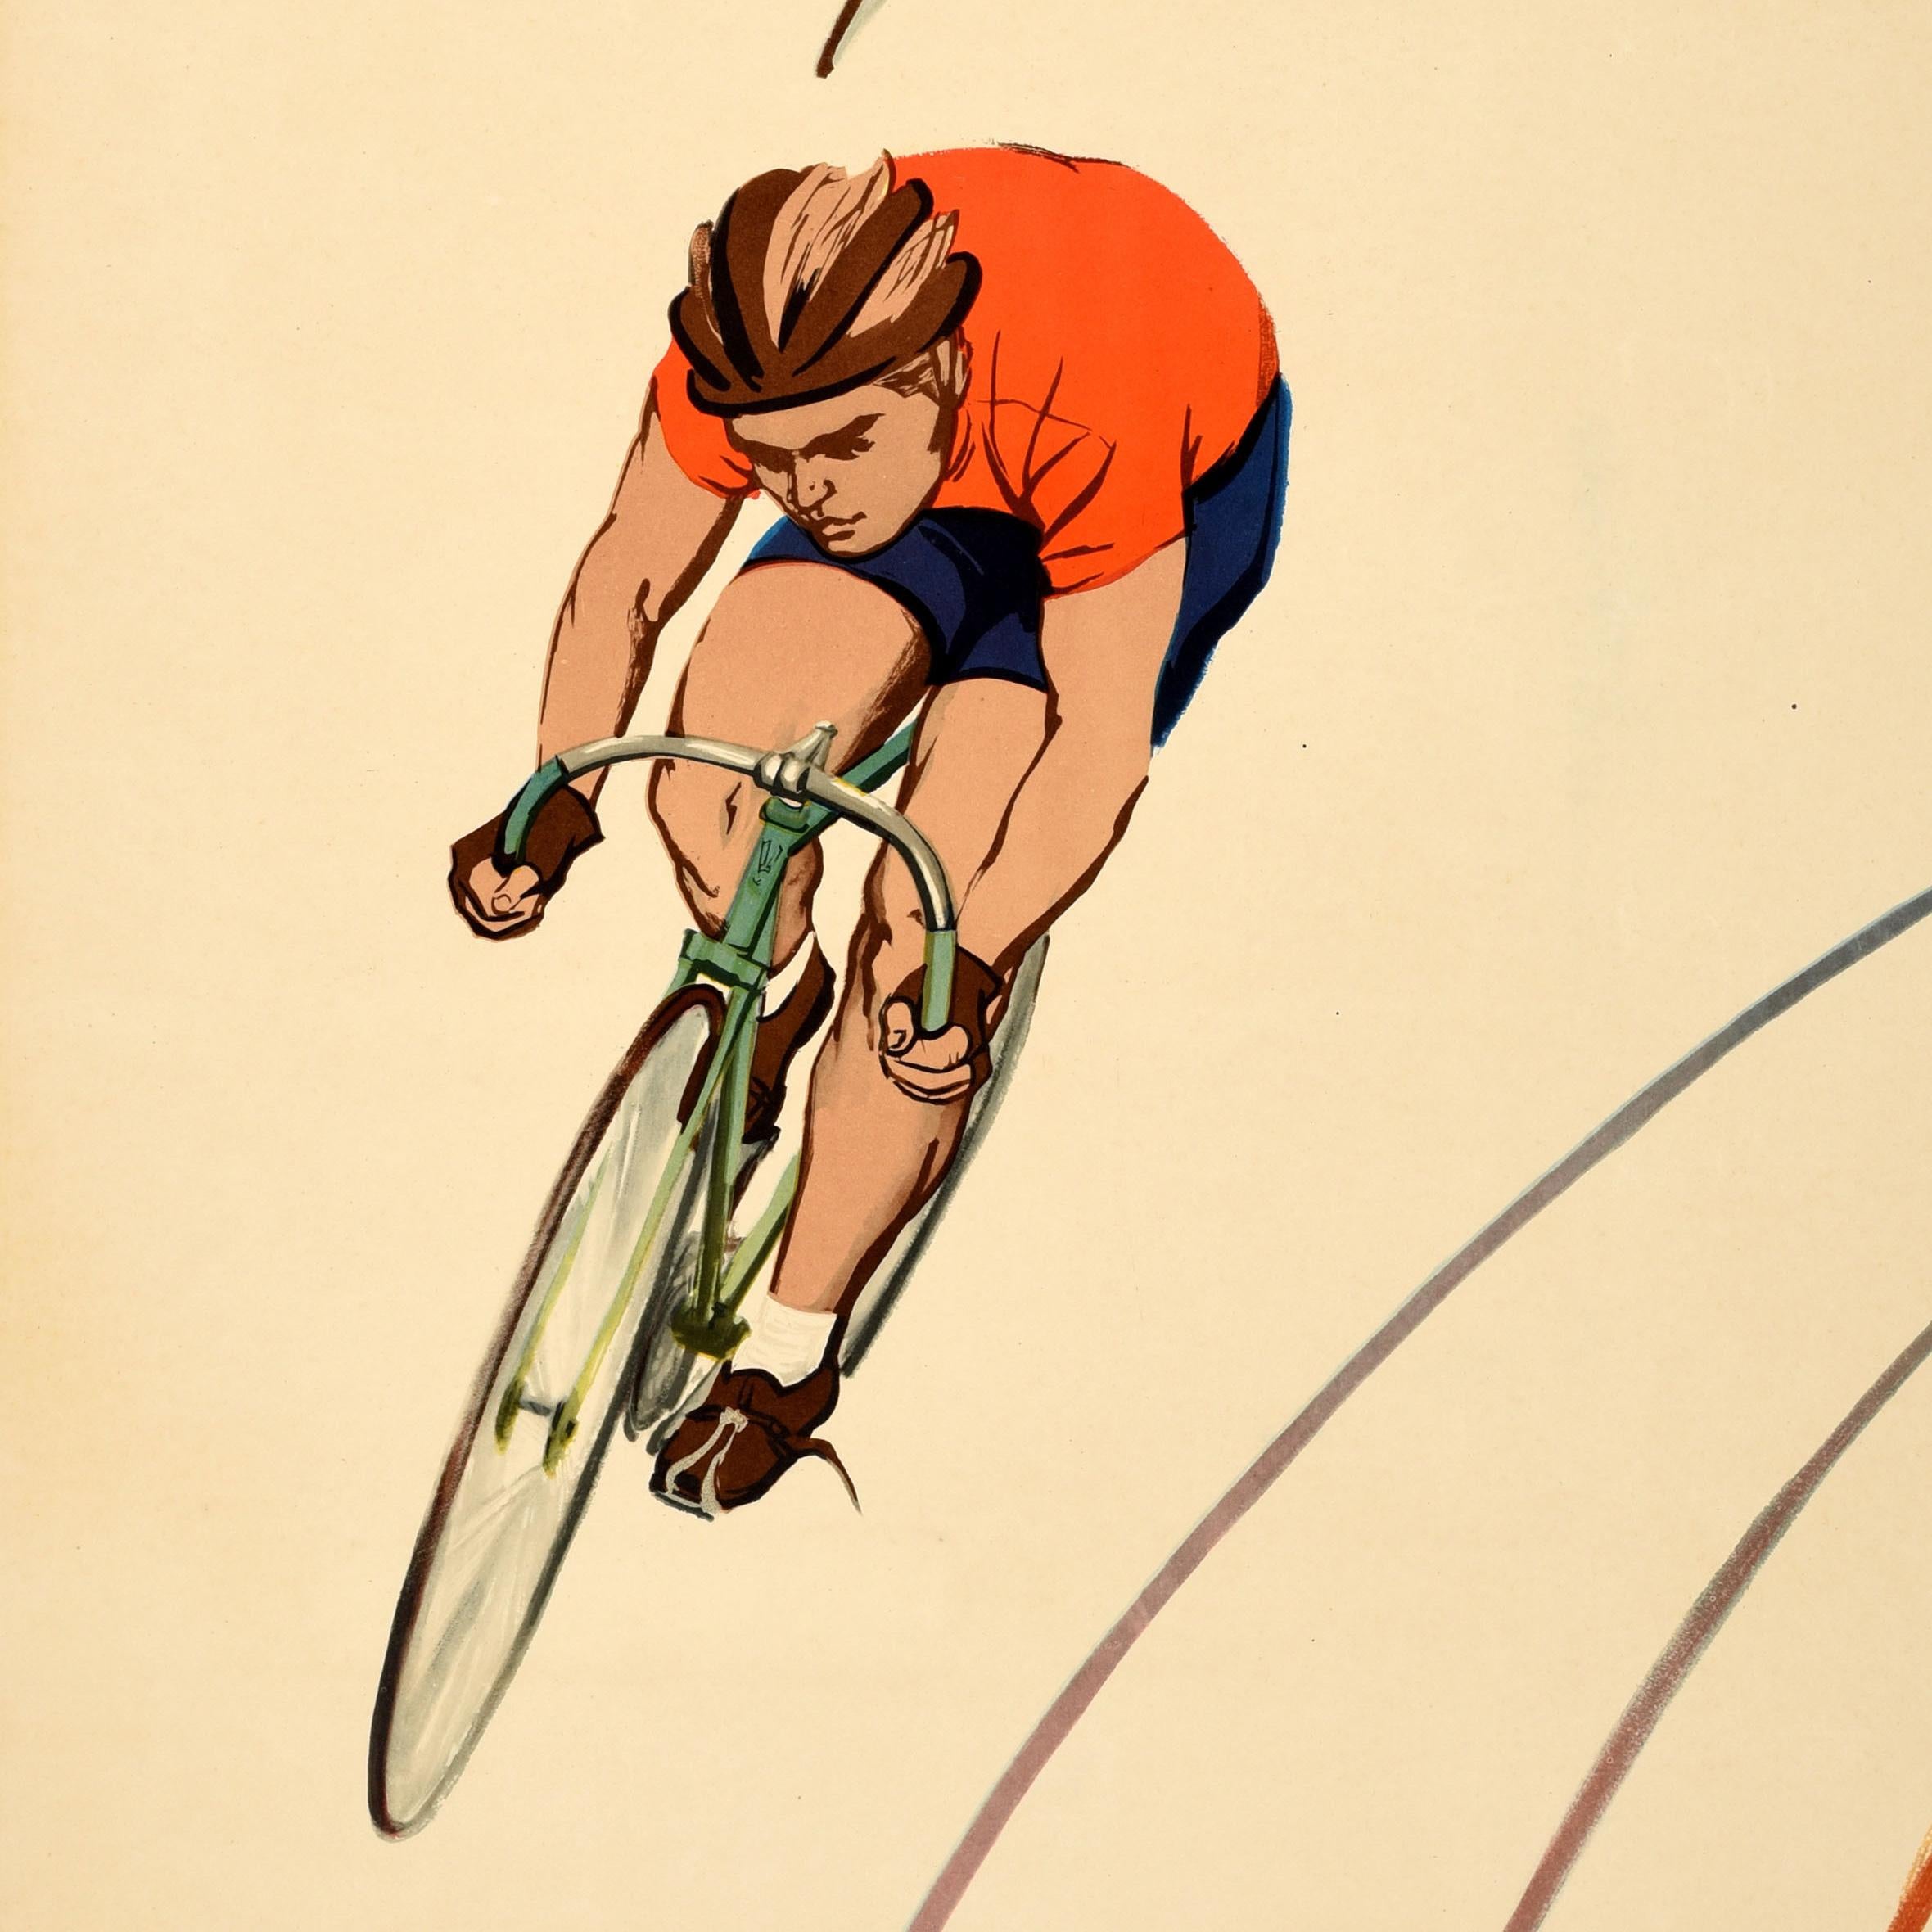 Original vintage bicycle sport poster - To New Successes in Soviet Sports / К новым успехам в советском спорте! - featuring a great graphic design depicting cyclists racing around a velodrome at speed wearing cycling helmets and different coloured